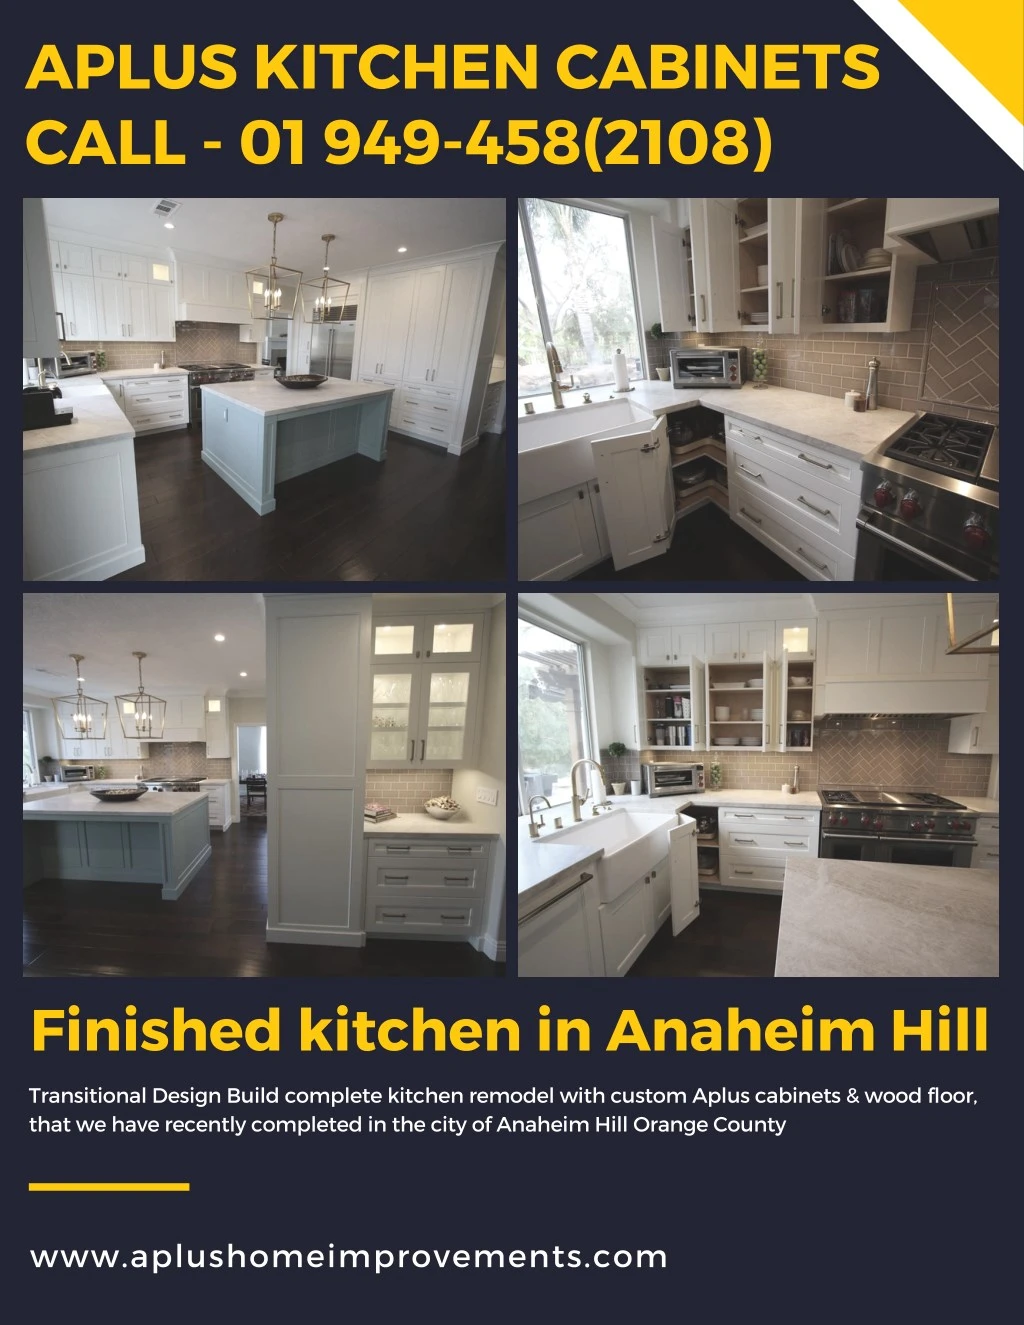 aplus kitchen cabinets call 01 949 458 2108